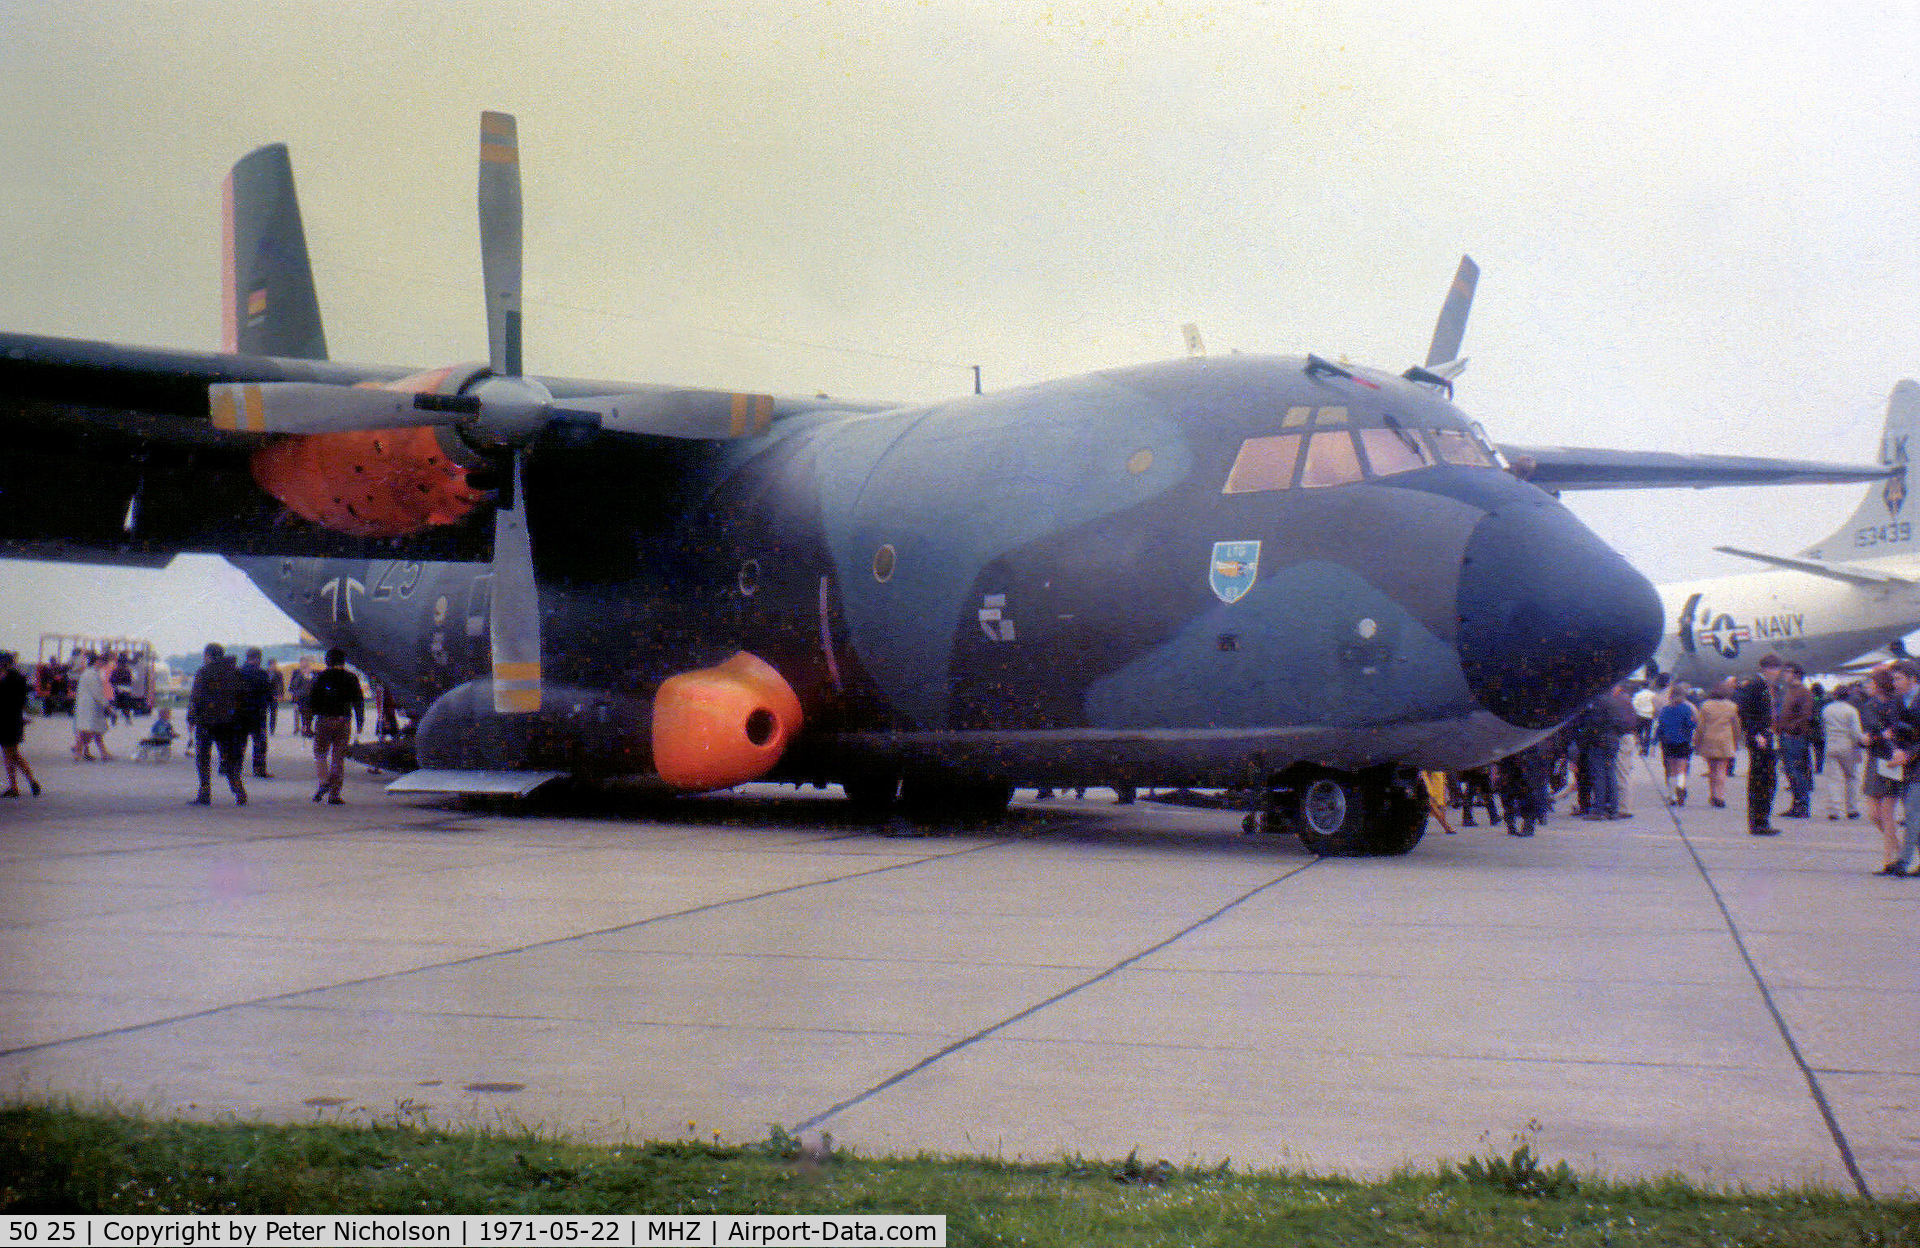 50 25, Transall C-160D C/N D33, C-160D of German Air Force's LTG-63 on dsplay at the 1971 RAF Mildenhall Aior Fete.